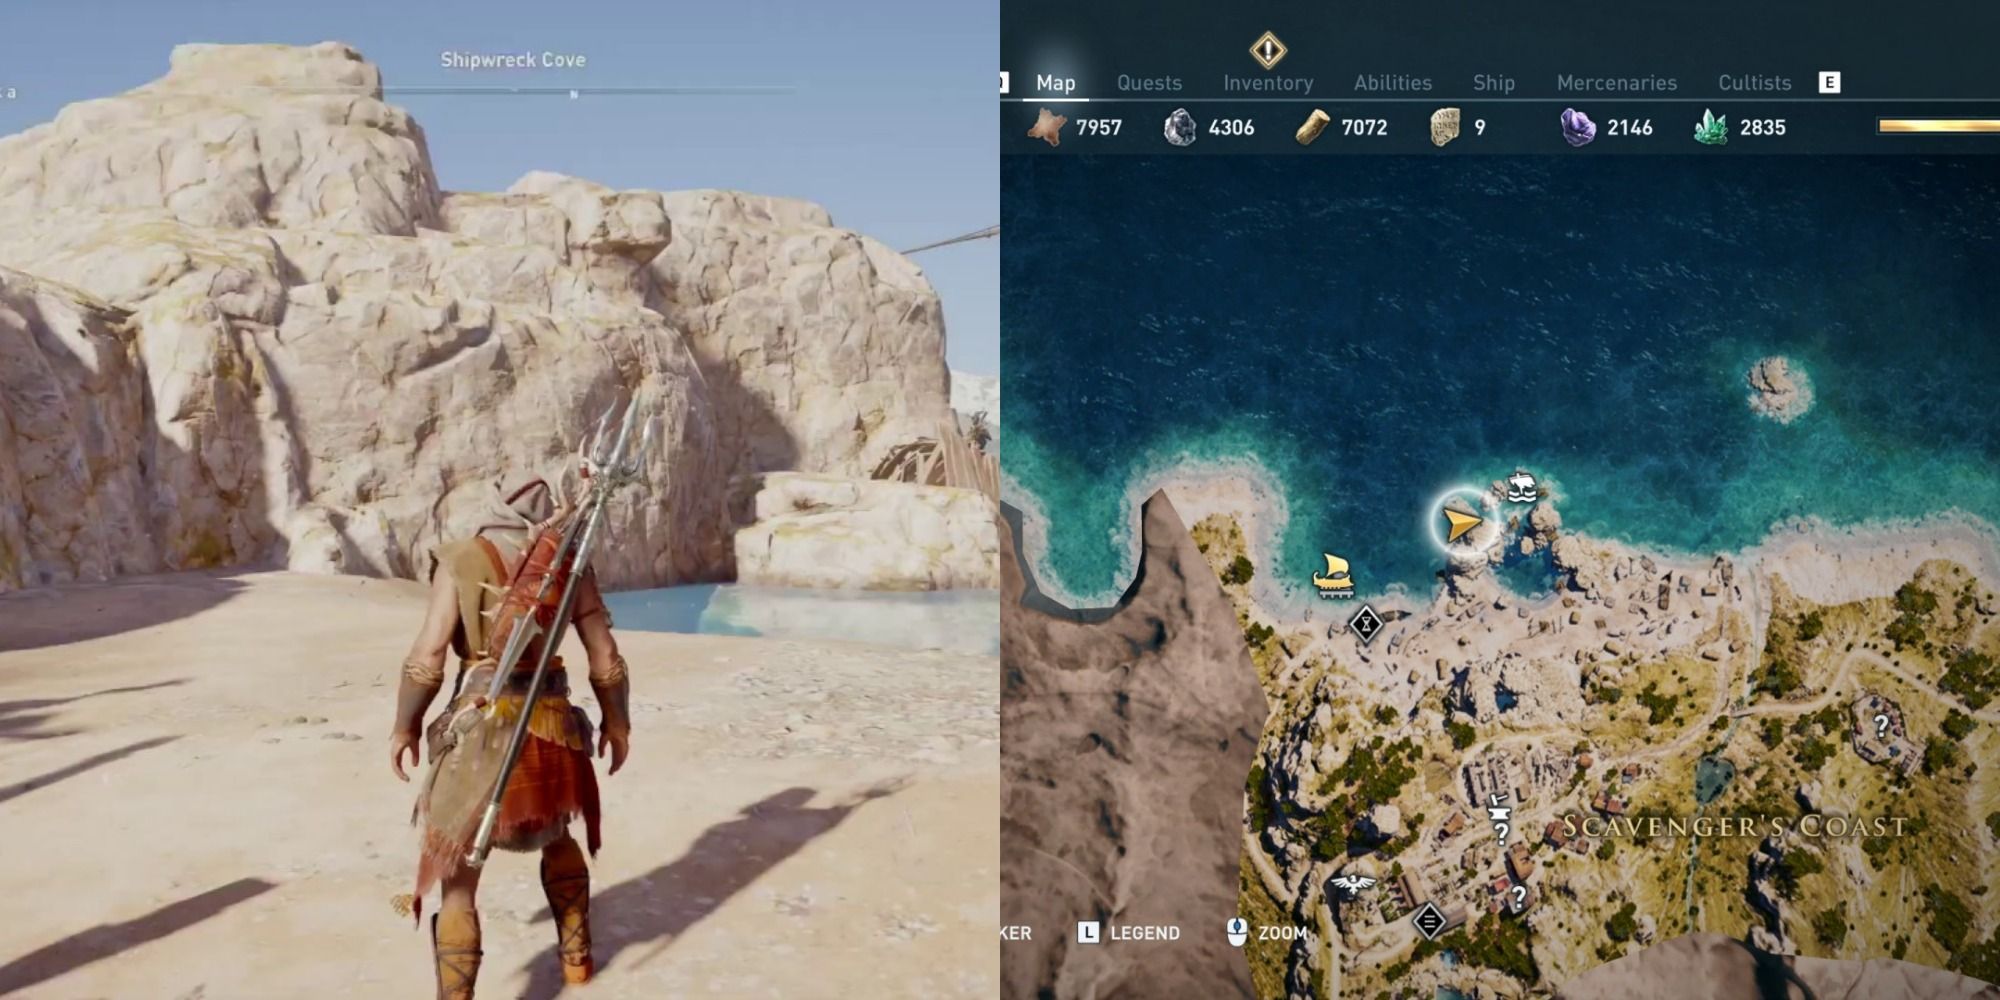 Assassin's Creed Odyssey: How To Find The Cultist Shipwreck Cove